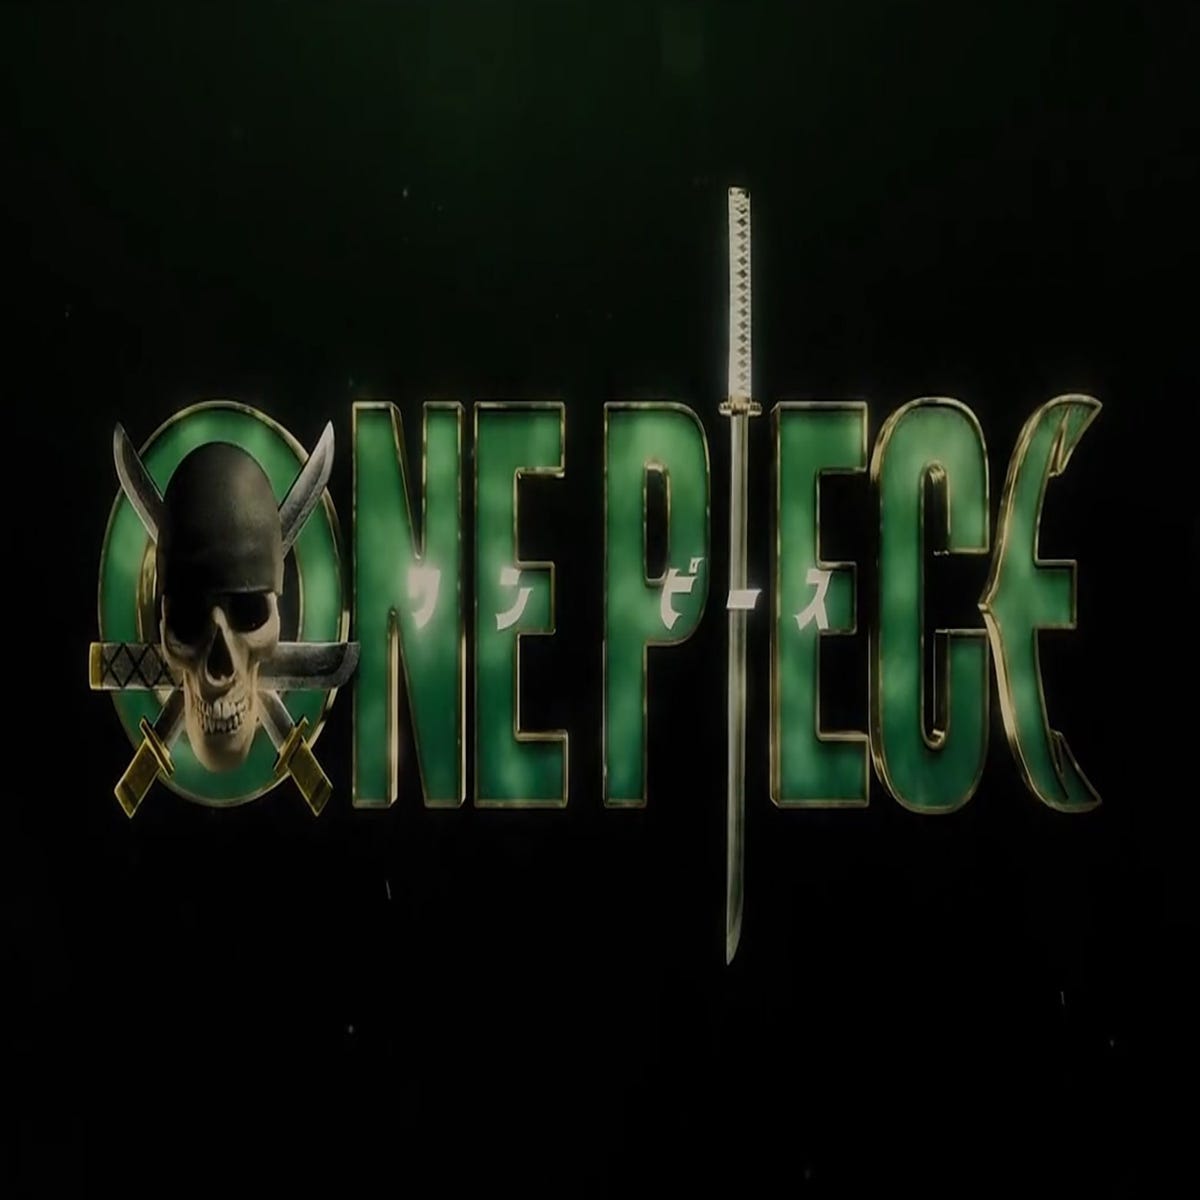 Episode Titles for Netflix's Live-Action 'One Piece Series